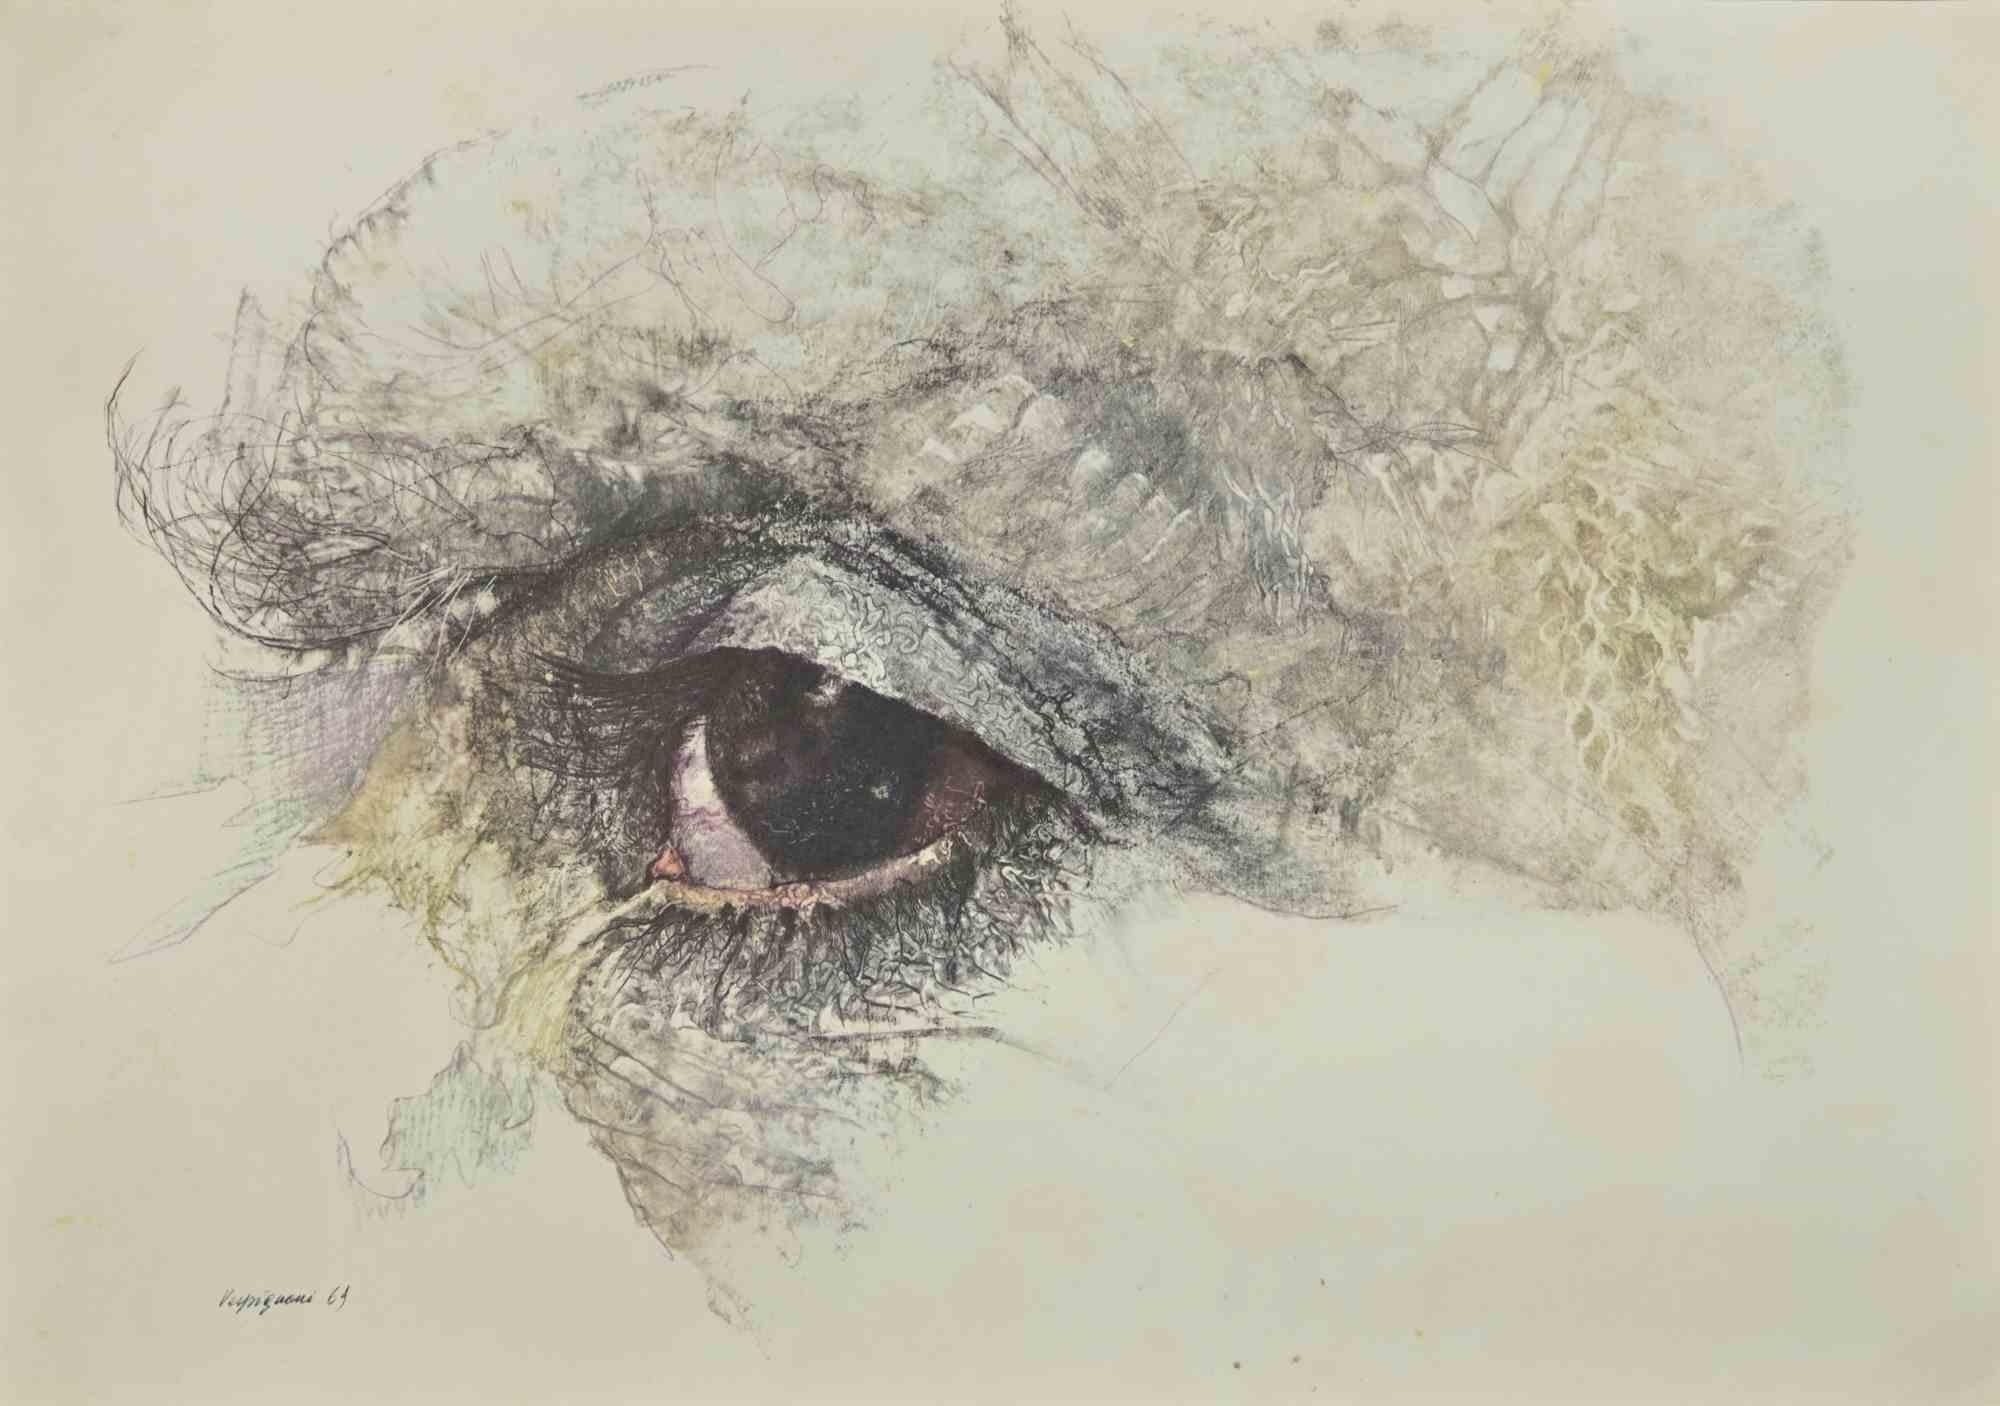 The Eyes is a phototype print reproducing drawing by Renzo Vespignani of the 1960s

Signed on the plate lower right.

The artwork is depicted through strong strokes and perfect hatchings.